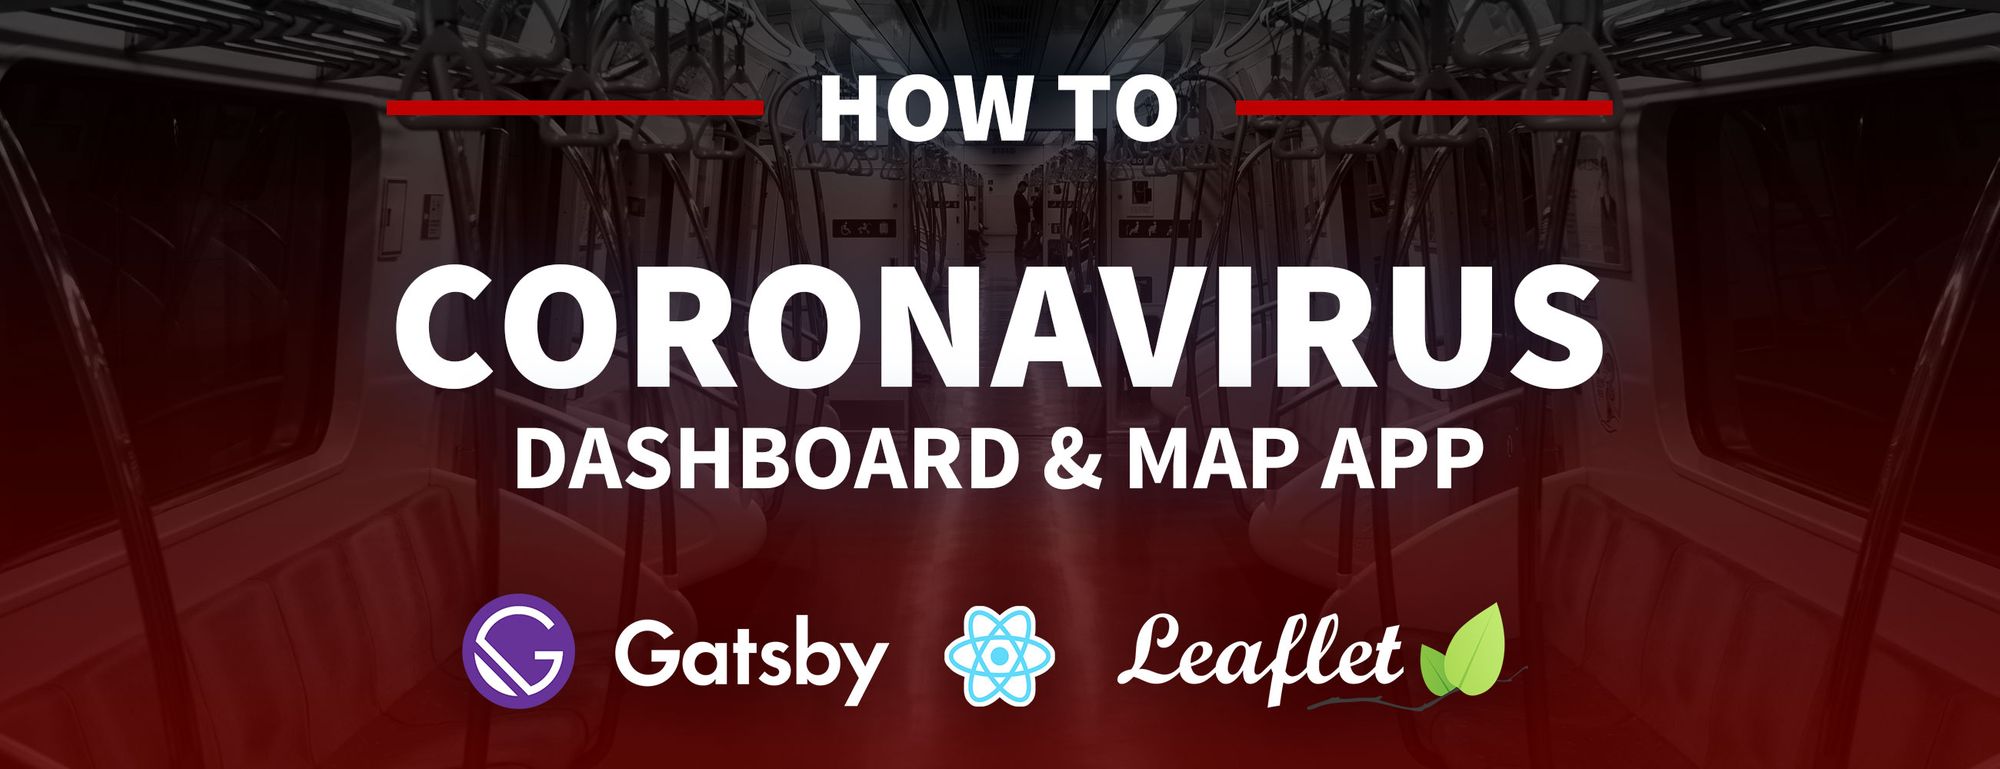 How to create a Coronavirus (COVID-19) Dashboard & Map App in React with Gatsby and Leaflet